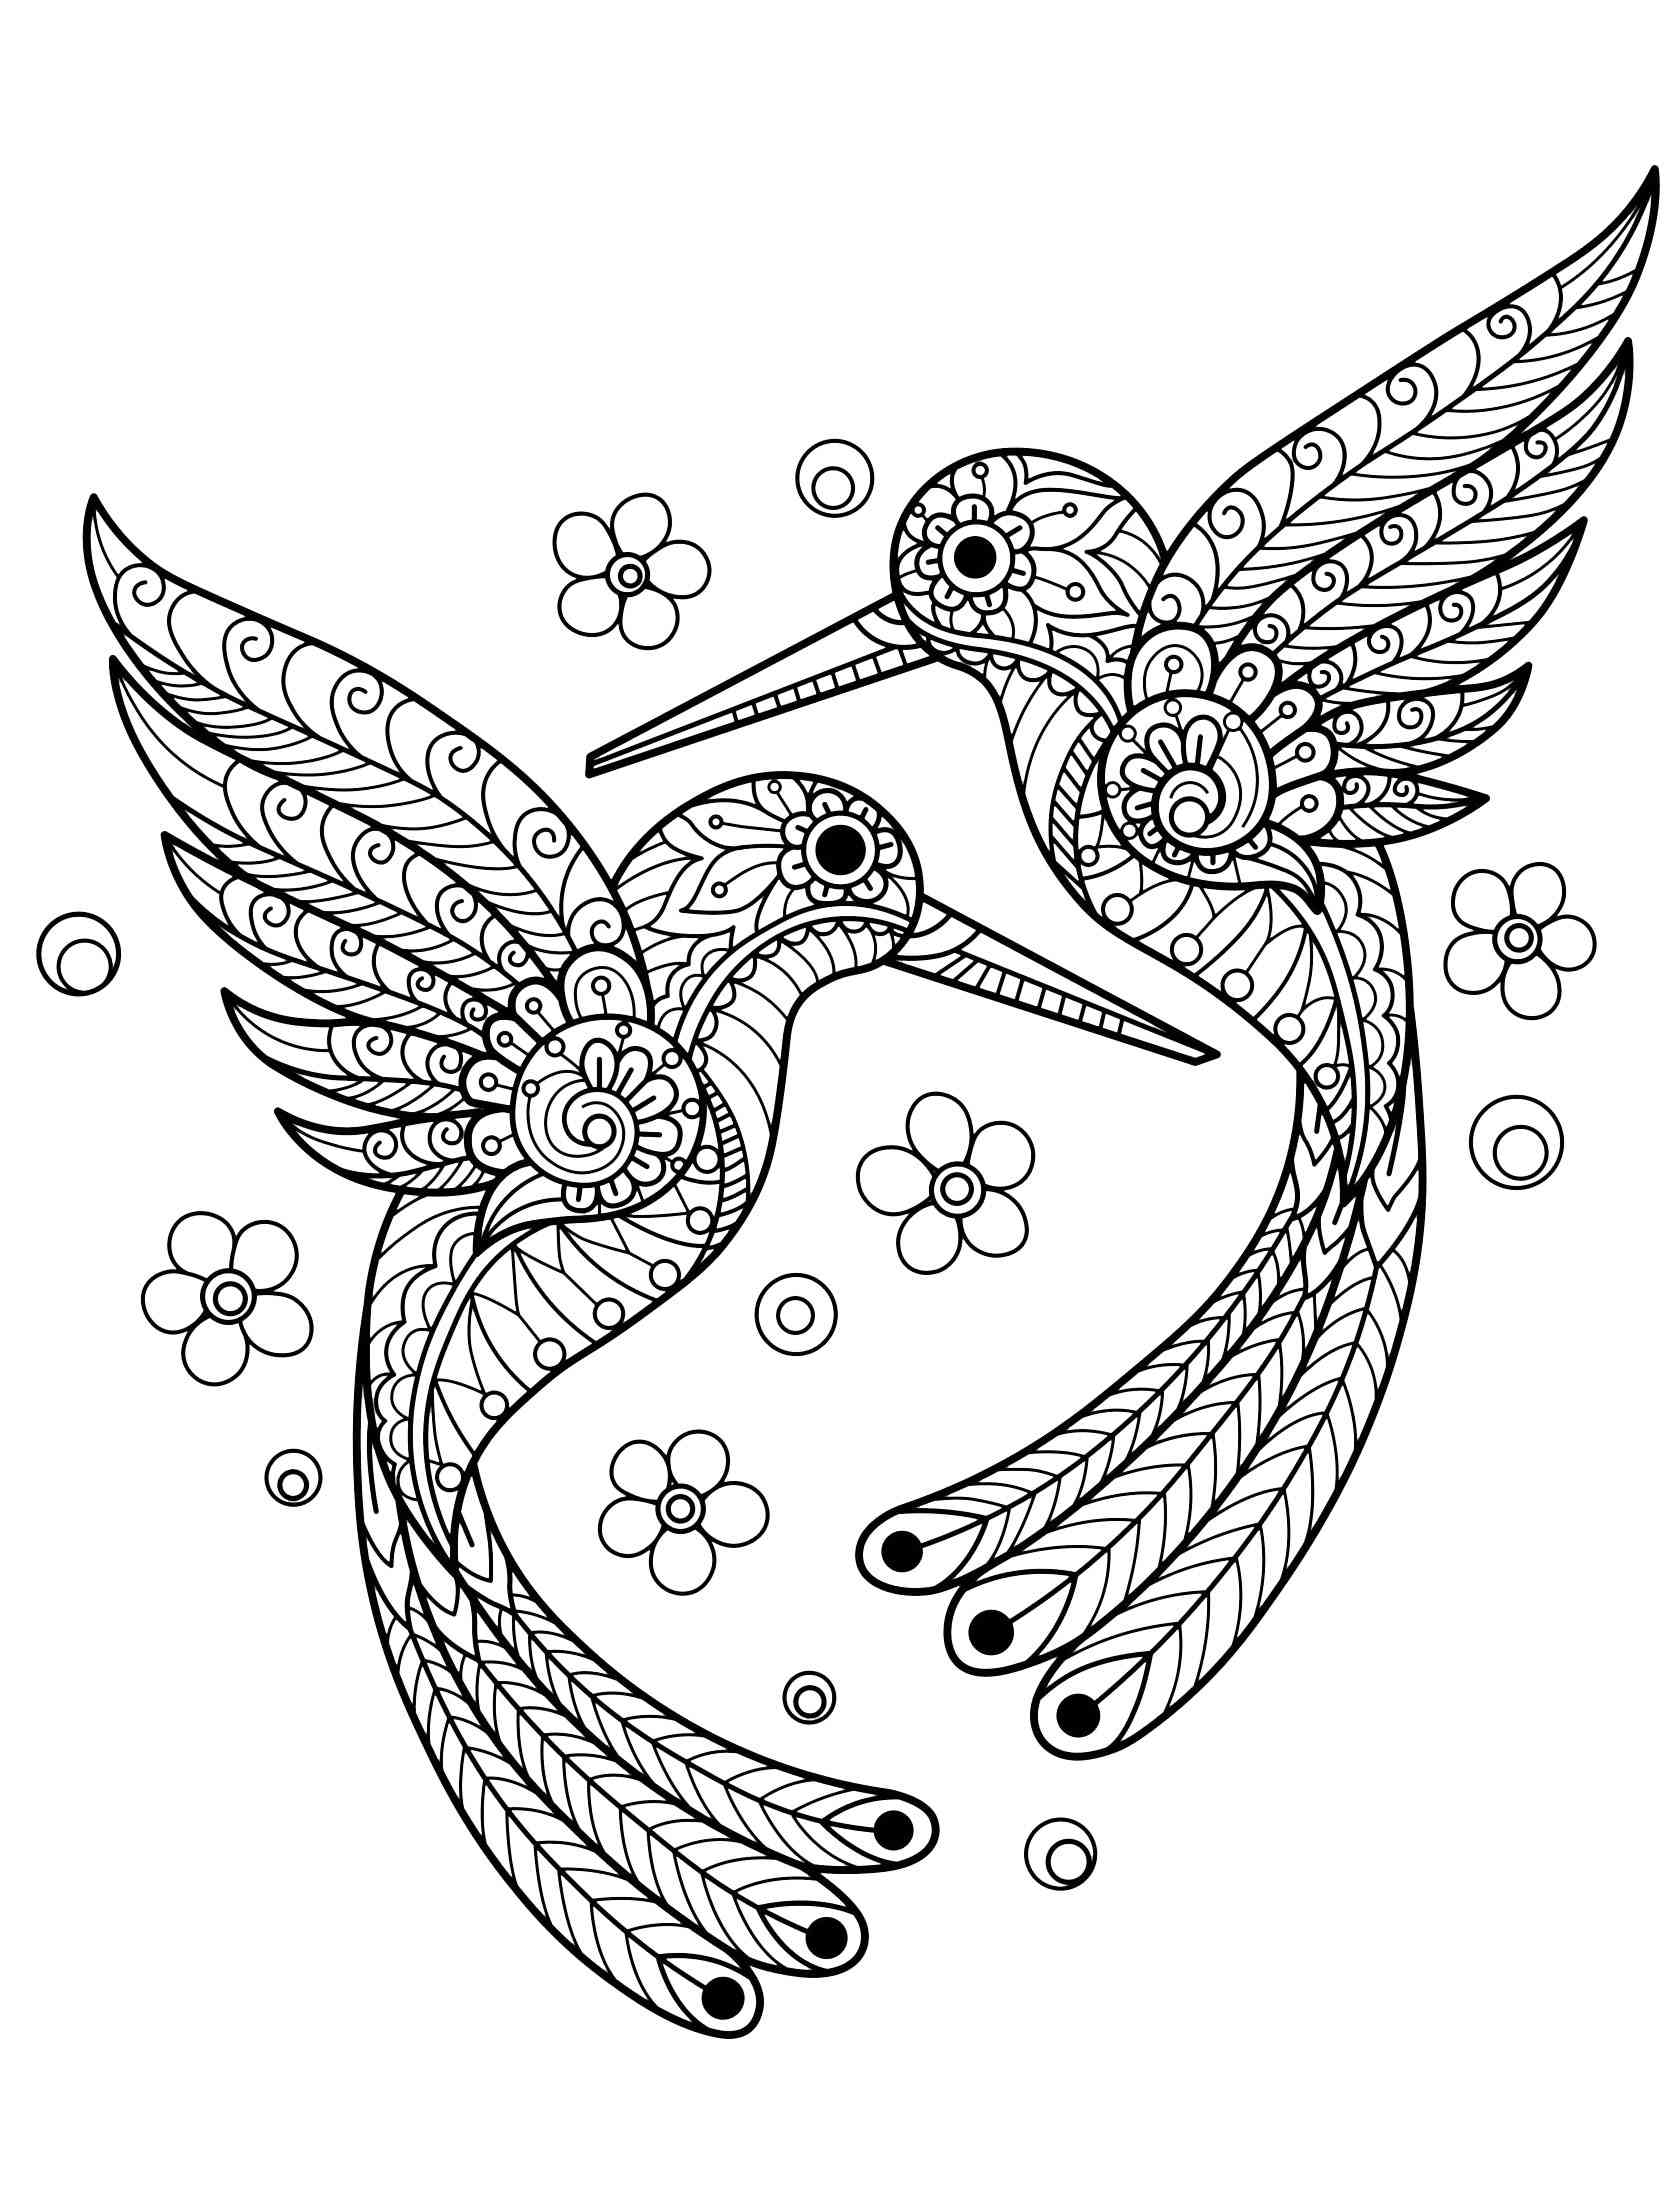 Hummingbird coloring pages for adults